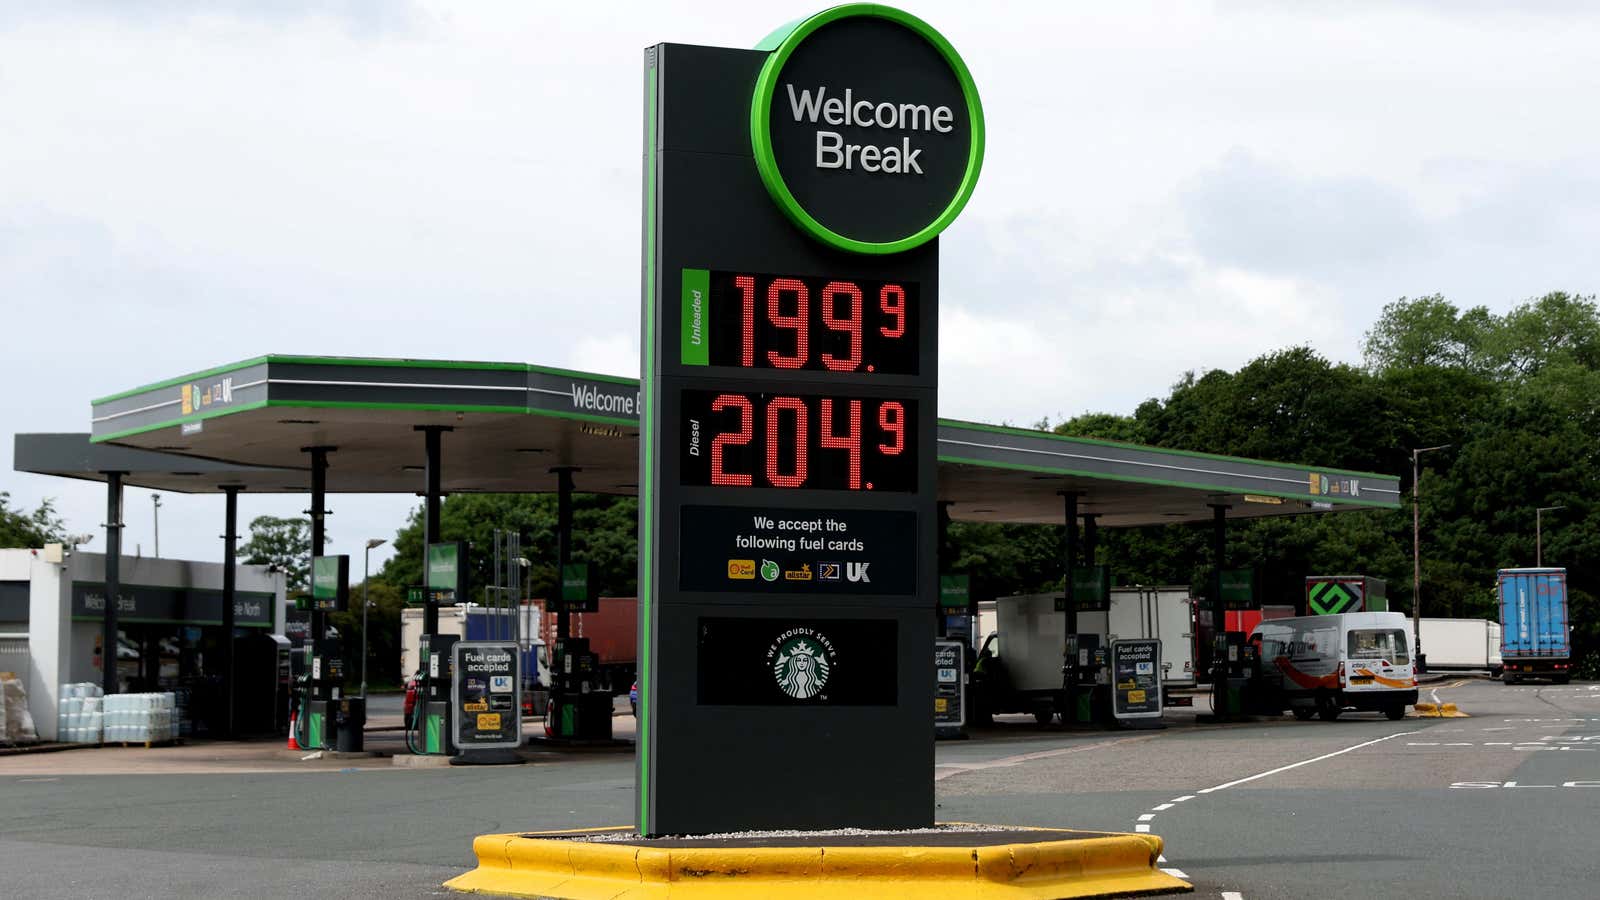 Increased fuel prices on display at a filling station in Staffordshire, England.